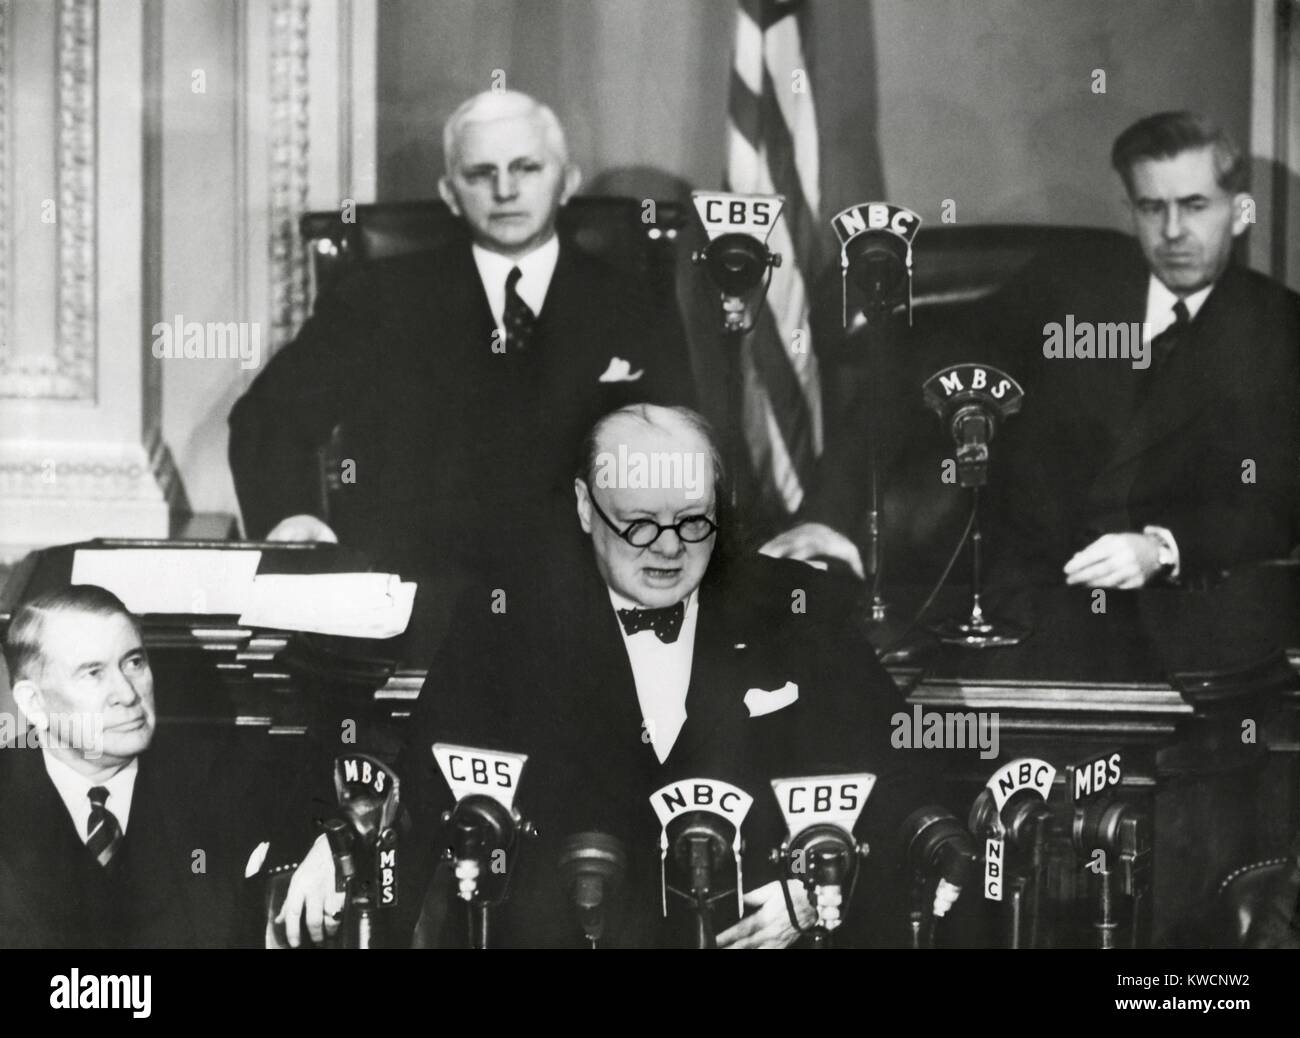 Prime Minister Winston Churchill speaking to a joint session of Congress, Dec. 26, 1941. Less than 3 weeks after the Japanese Attack on Pearl Harbor, Churchill visited the U.S. to strengthen the British-U.S. alliance. Behind him on the Rostrum, L-R: Rep. William Cole, Vice President Henry Wallace. At Lower left is Sen Alben Barkley, Majority Leader. - (BSLOC 2014 17 36) Stock Photo